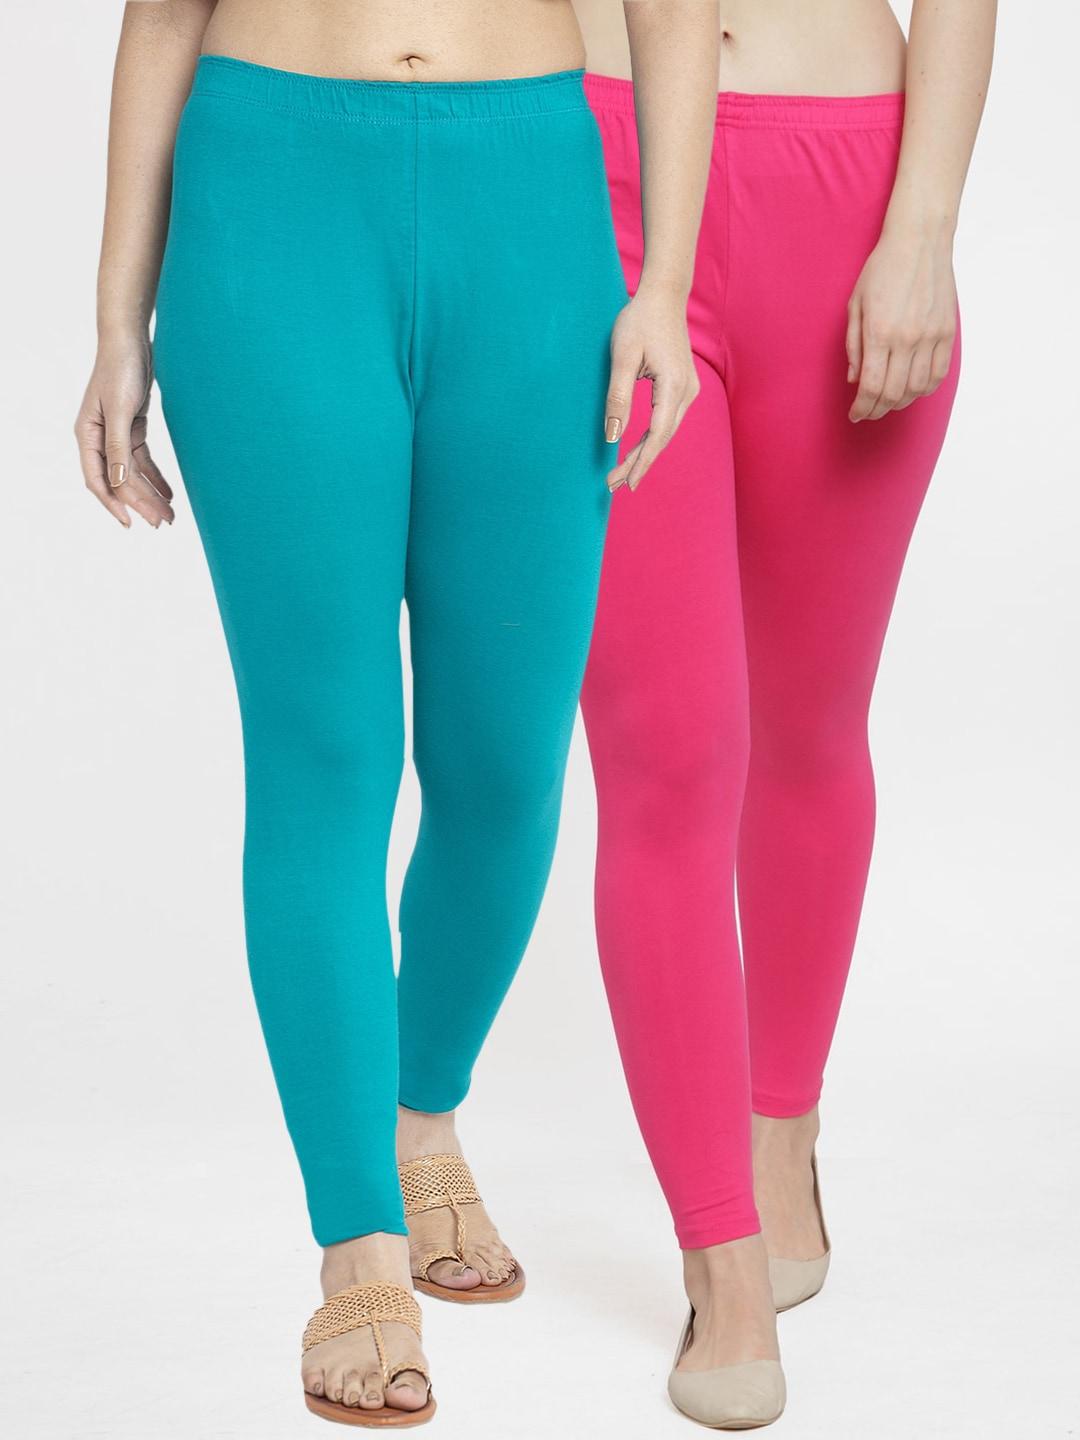 jinfo-women-pack-of-2-solid-pink-&-blue-cotton-leggings